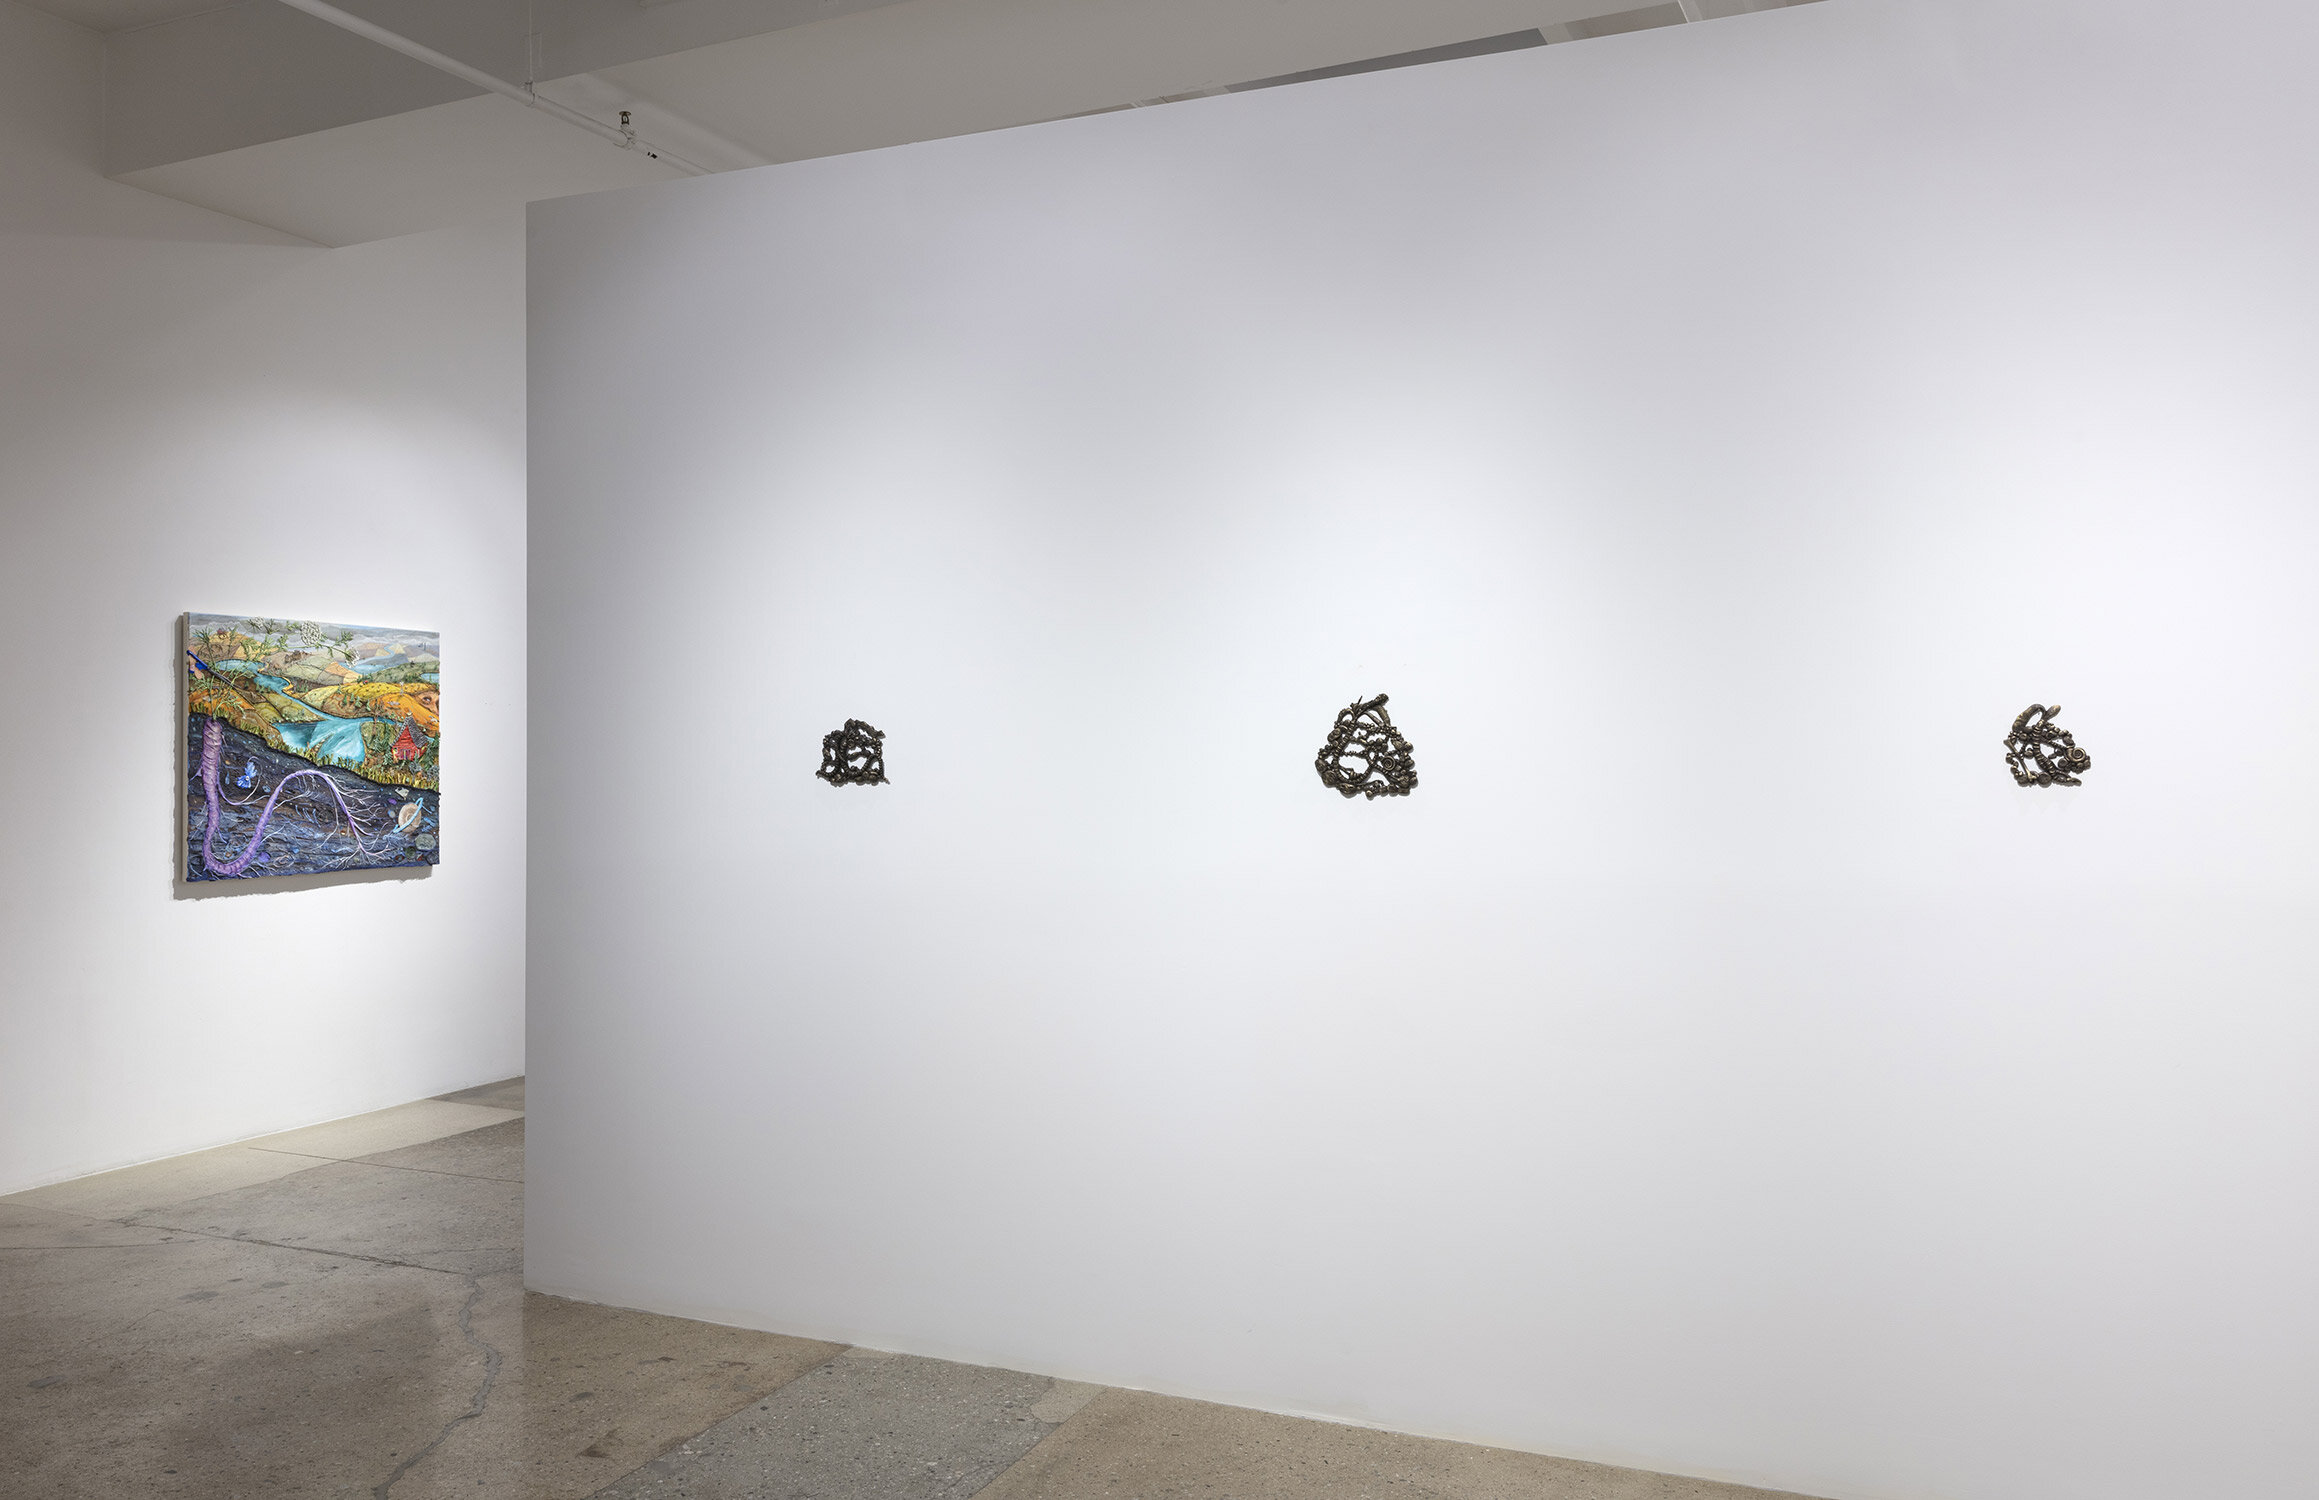  Installation view from “Grown Woman” at Steve Turner, 2021, Los Angeles, California.  